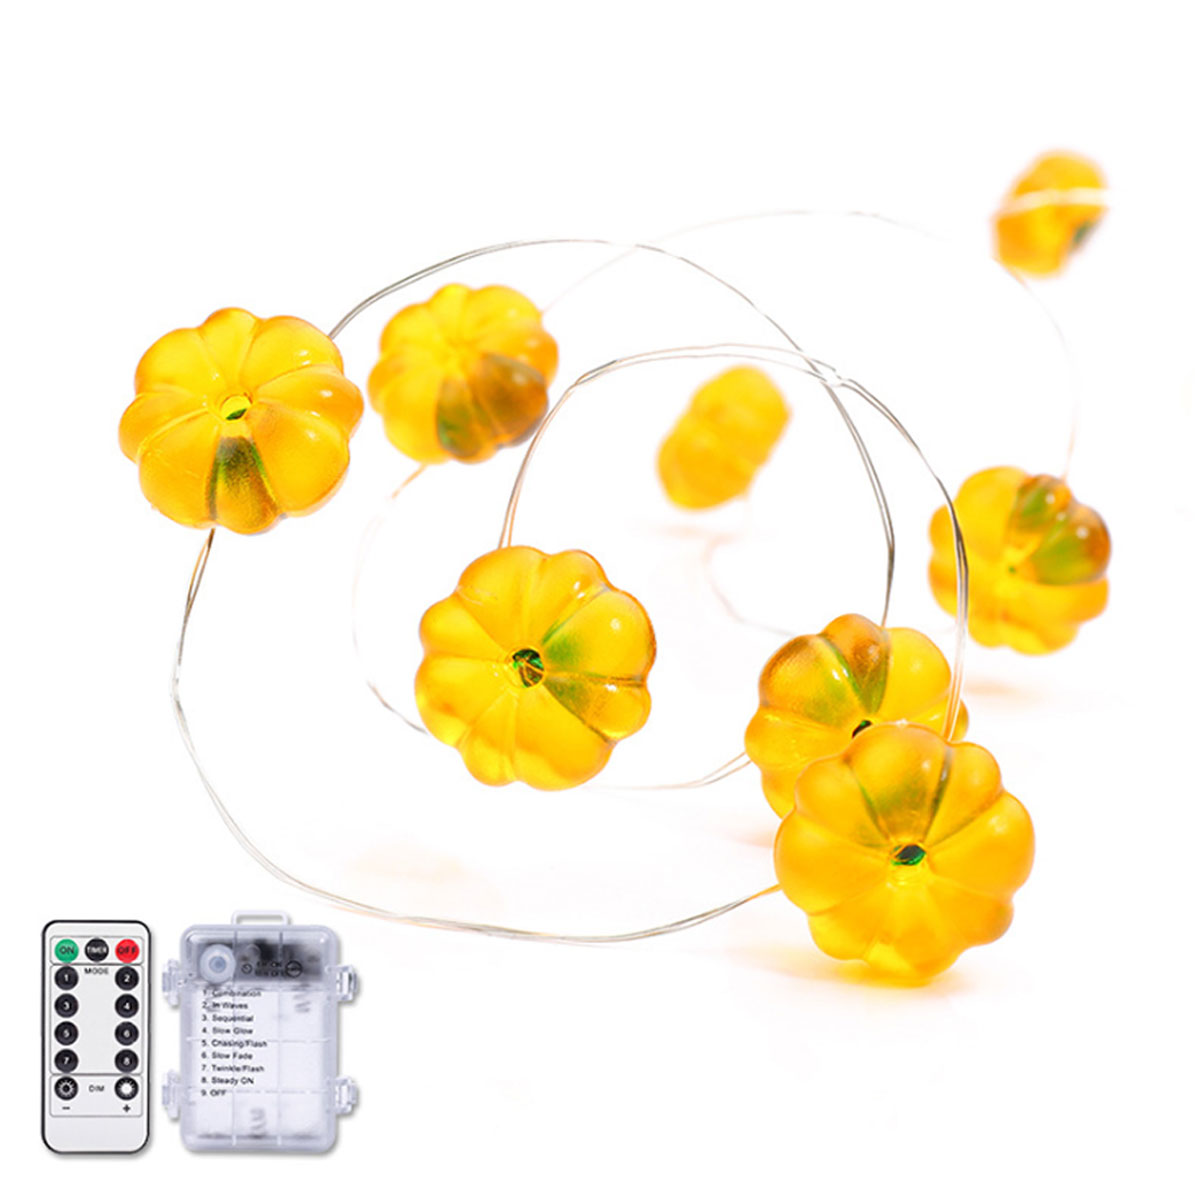 2M3M4M-LED-Pumpkin-String-Light-8-Modes-Waterproof-Outdoor-Party-Holiday-Fairy-Lamp-for-Garden-Home--1733349-3